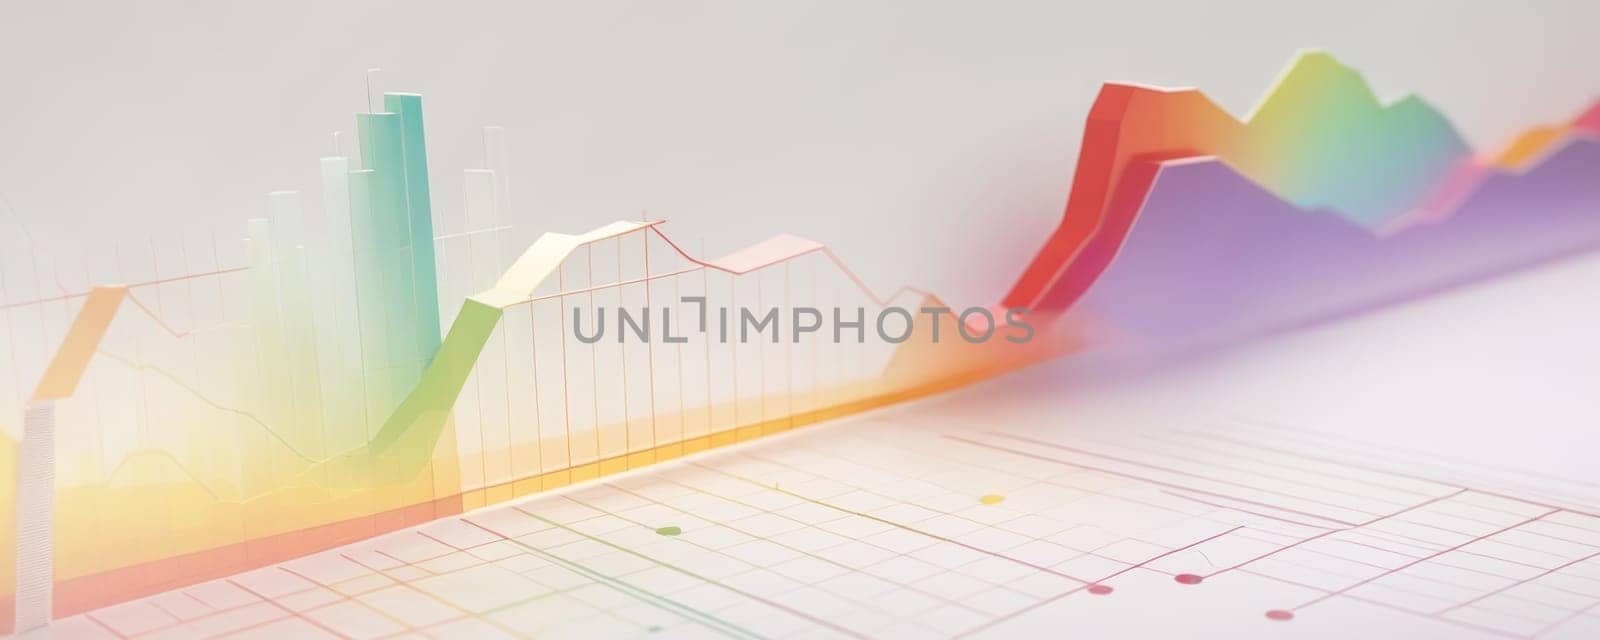 The image showcases a colorful and abstract representation of financial graphs and charts. It includes bar graphs with varying heights, depicted in shades of green, and a line graph with a fluctuating trend, changing colors from yellow to red as it progresses. The graphs have a 3D appearance and are casting shadows on the grid surface they rest upon. Generative AI